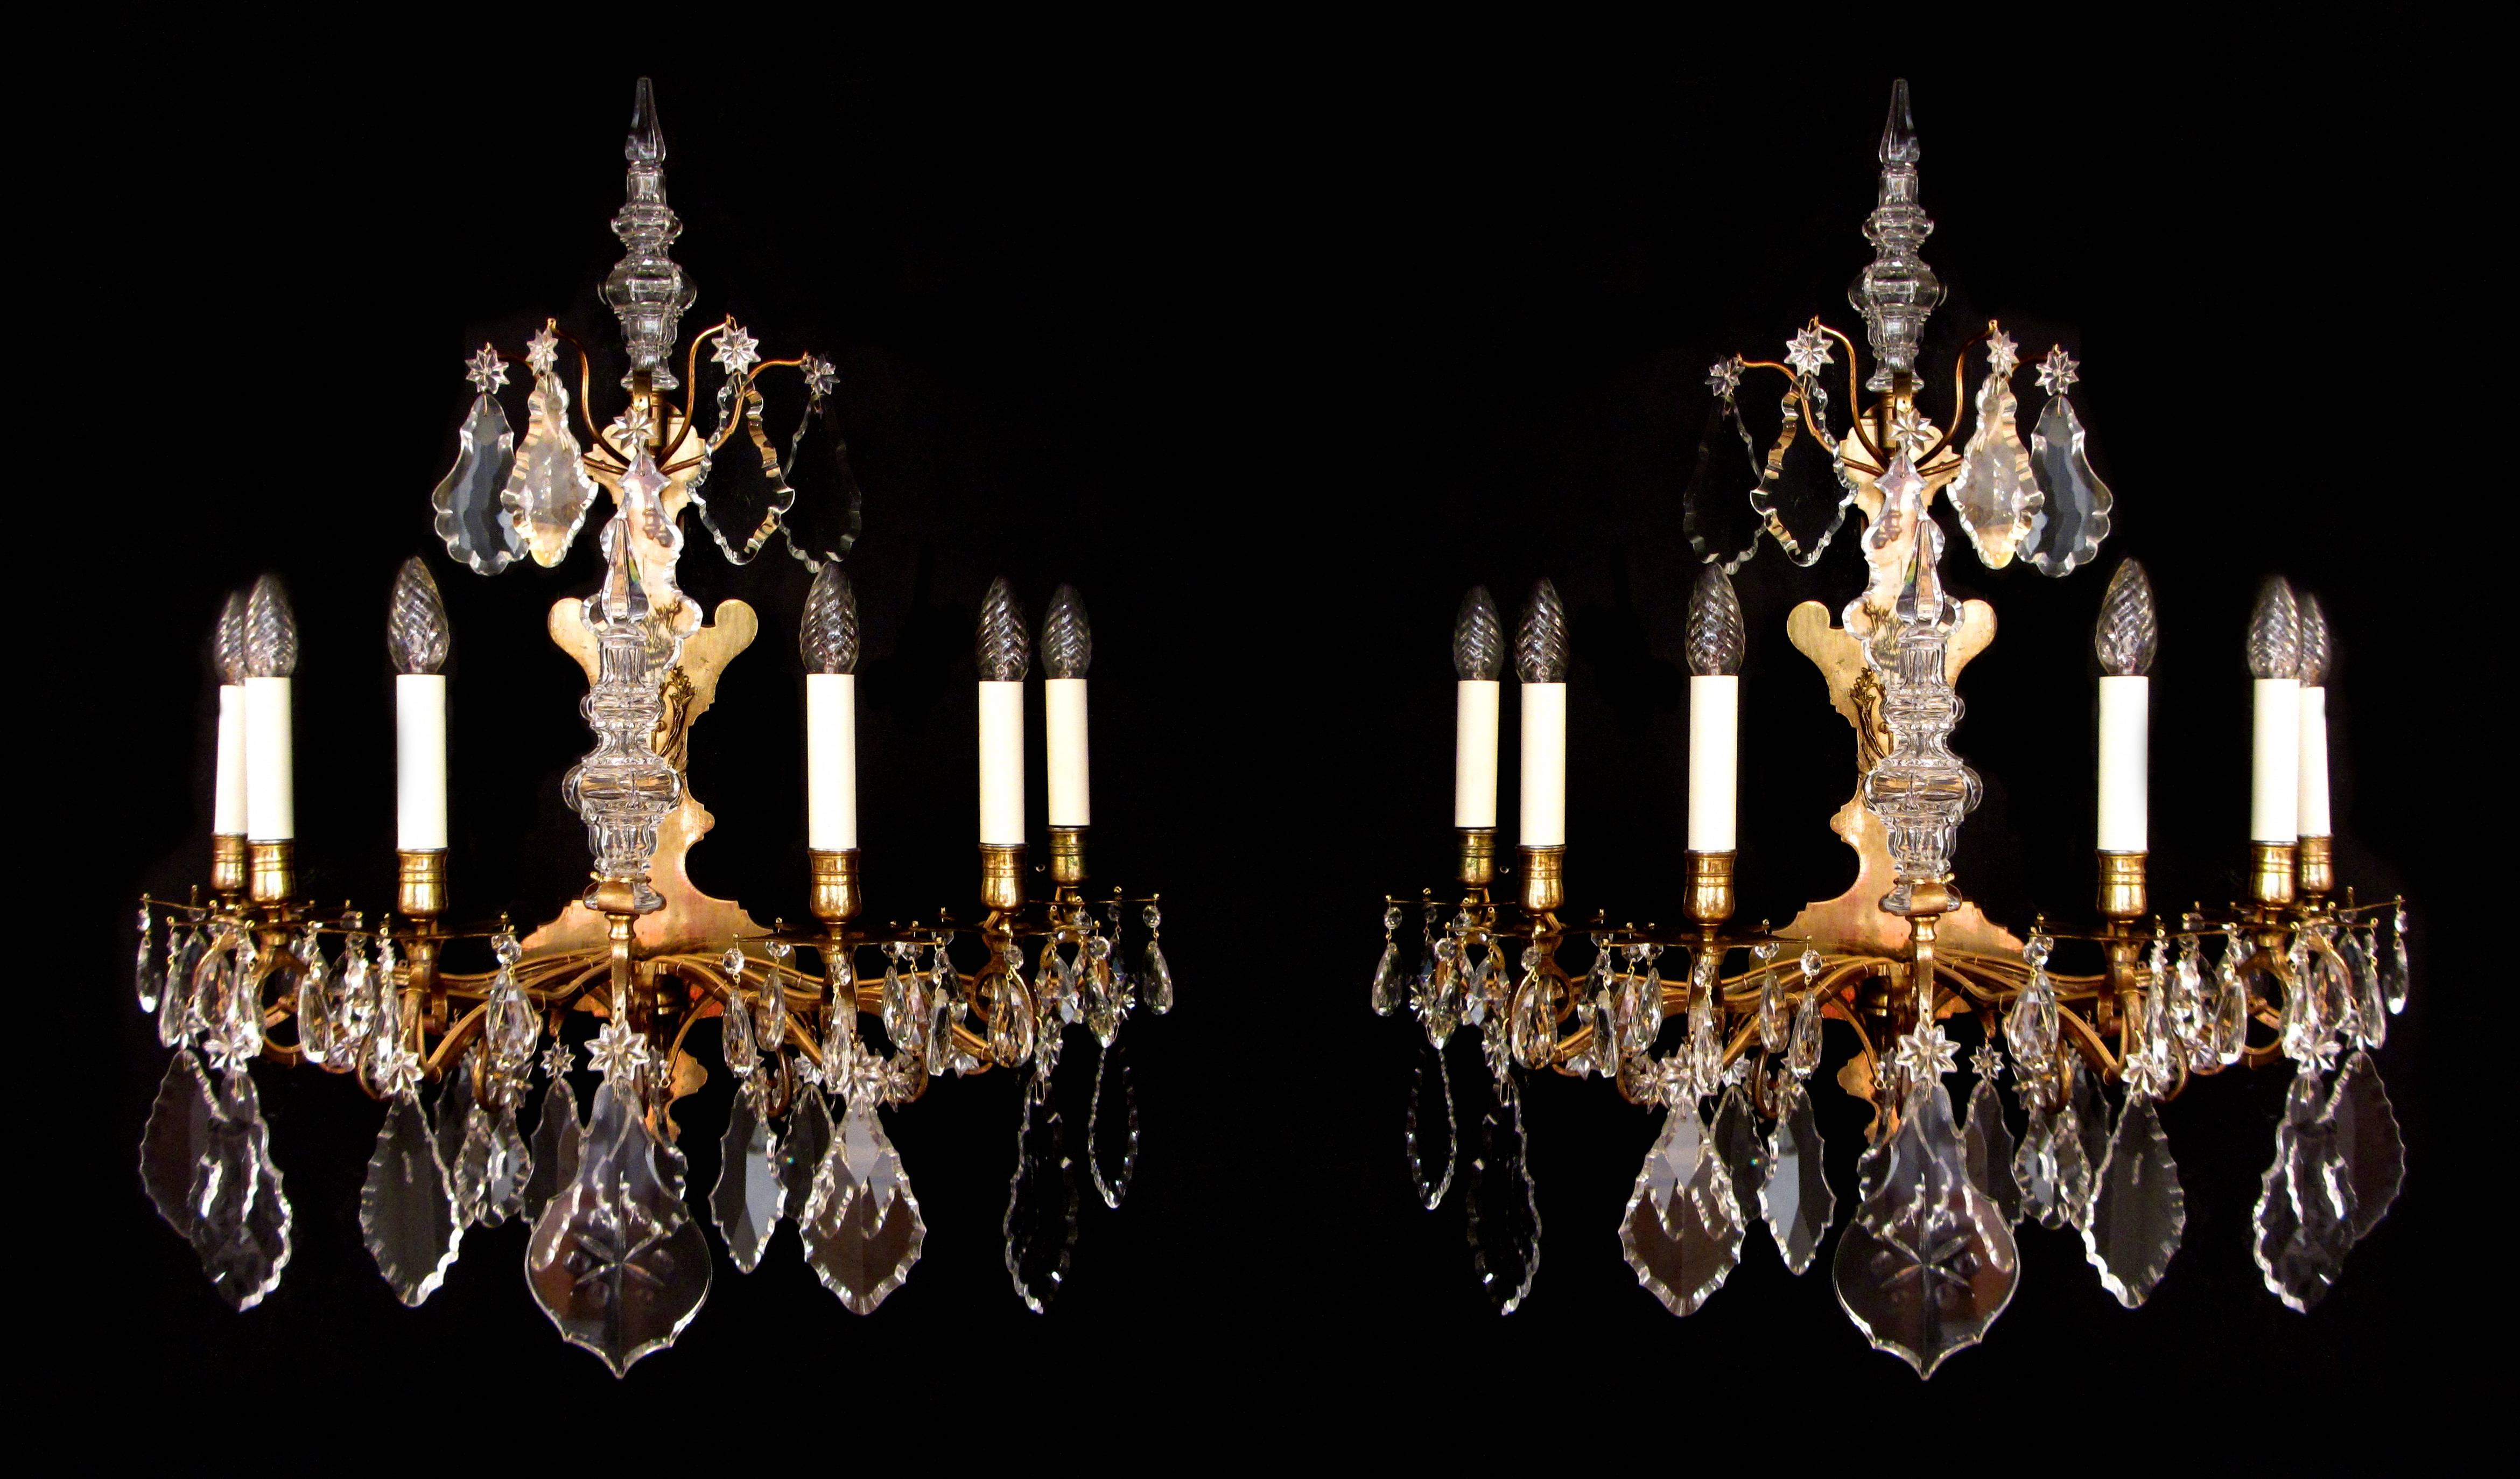 A large pair of French gilt bronze and crystal wall lights. The frame projecting six arms of light with cut-glass plaques, stars and finials, circa 1840.